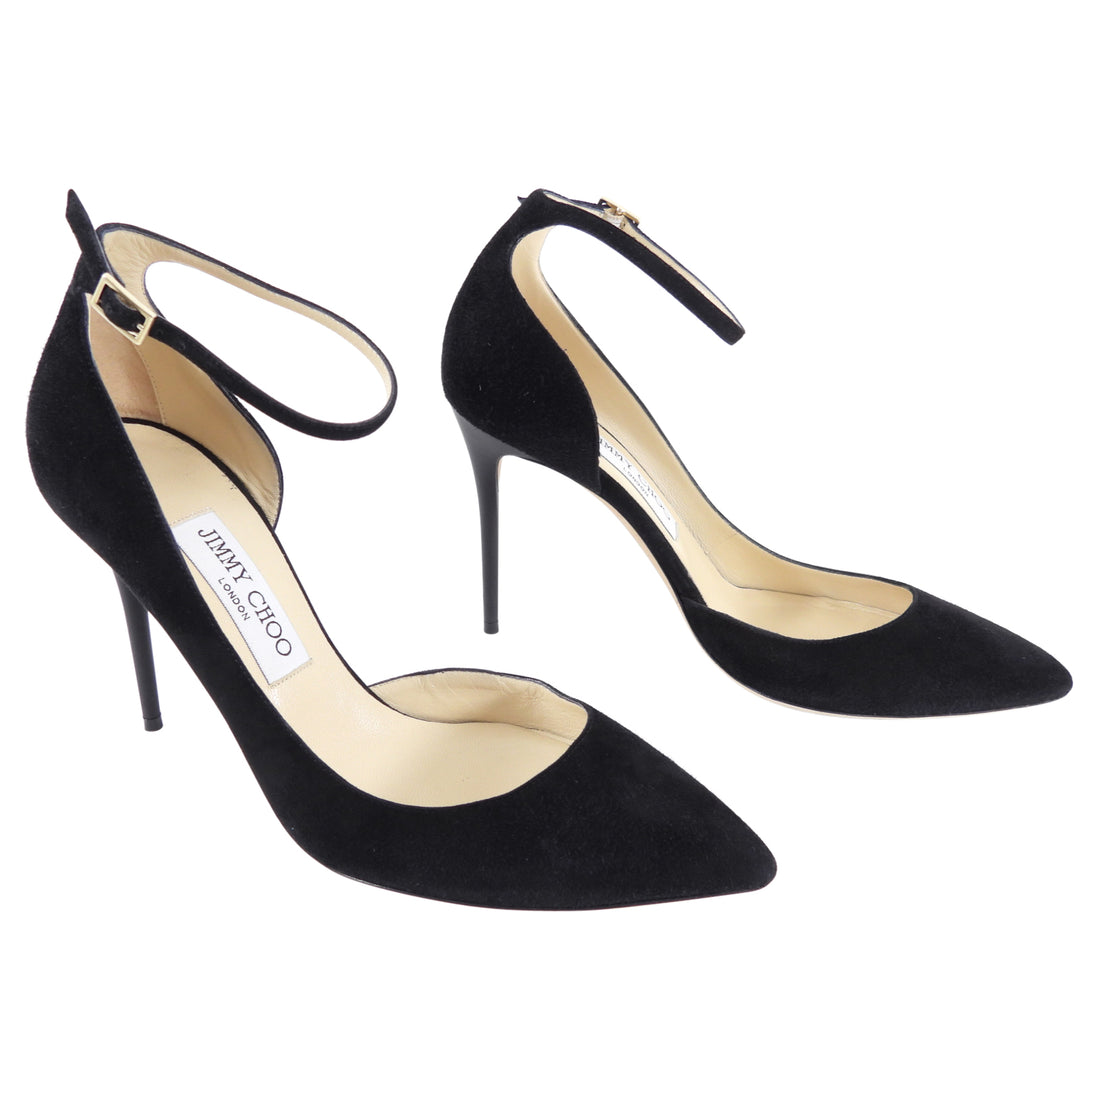 Jimmy Choo Black Suede High Heels with Ankle Strap - 38 / 7.5